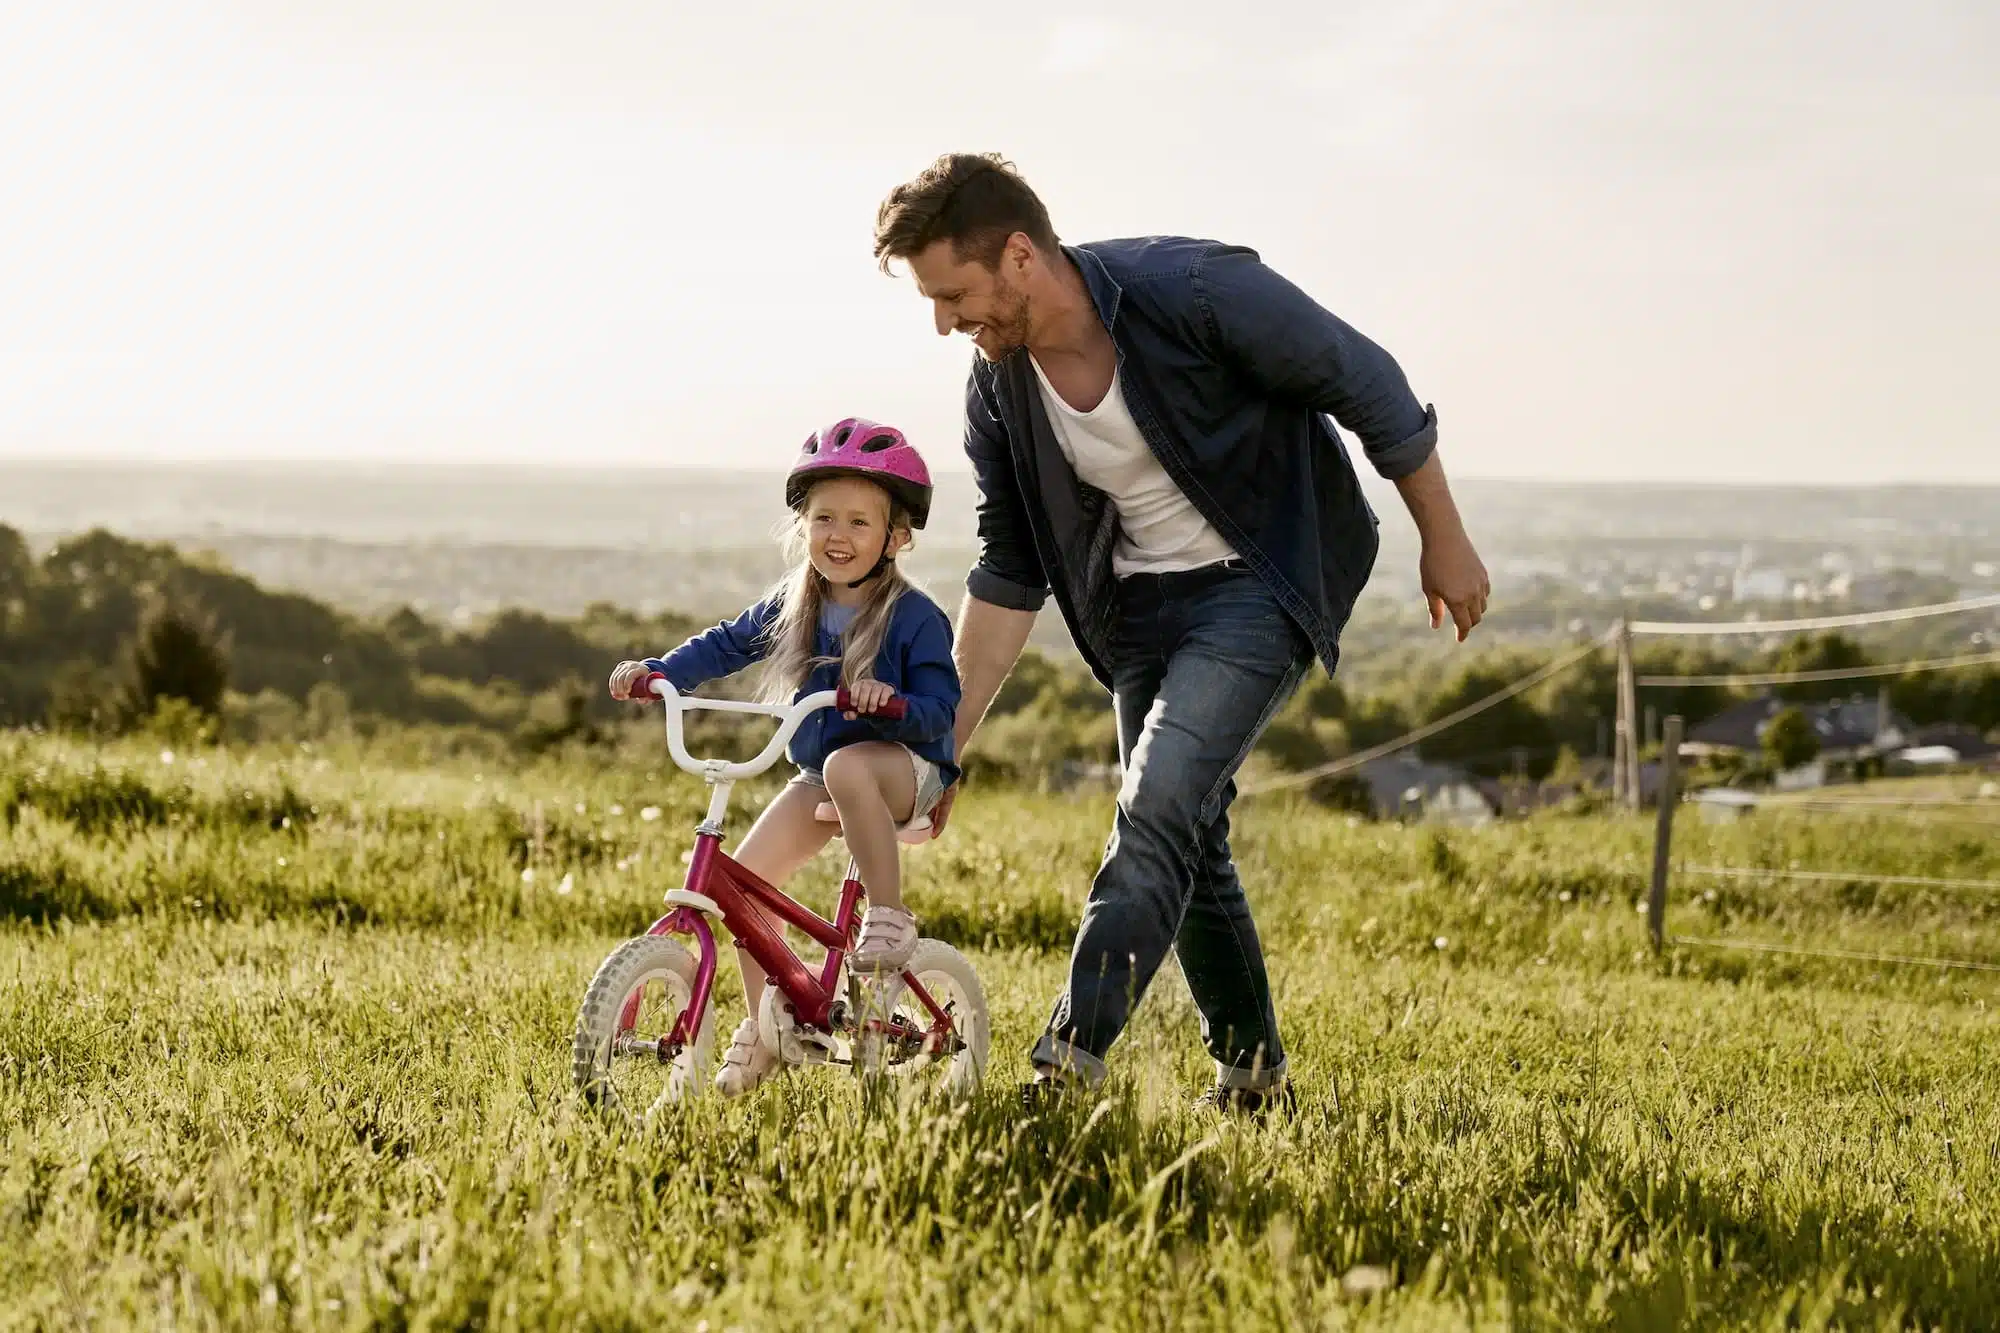 Caucasian man with toddler learning how to ride bike